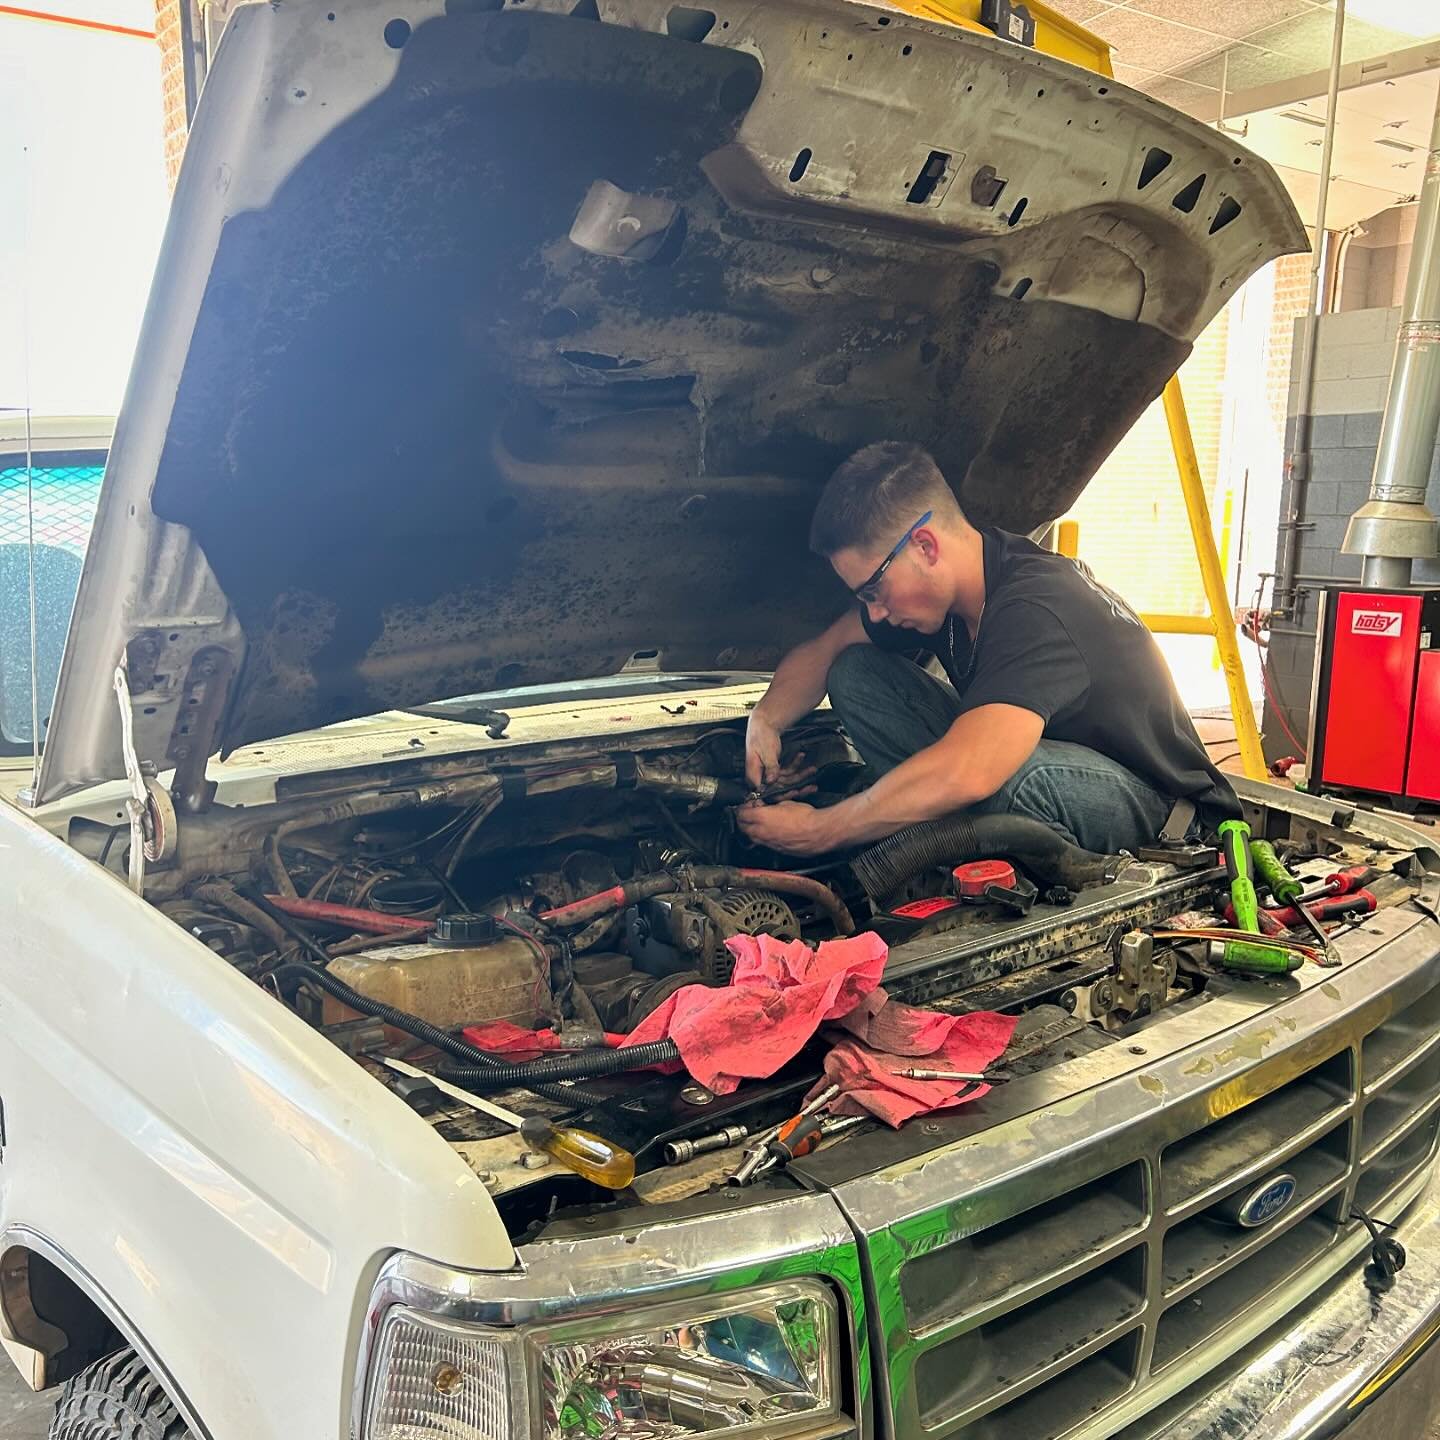 Jaxon Wilson, a Junior at Woodward High School, is seen here changing 8 injectors and an under valve cover harness in the HPTC Diesel shop. Jesse Palacios, one of Jaxon&rsquo;s instructors, captured this photo at 4:15, well after Jaxon&rsquo;s class 